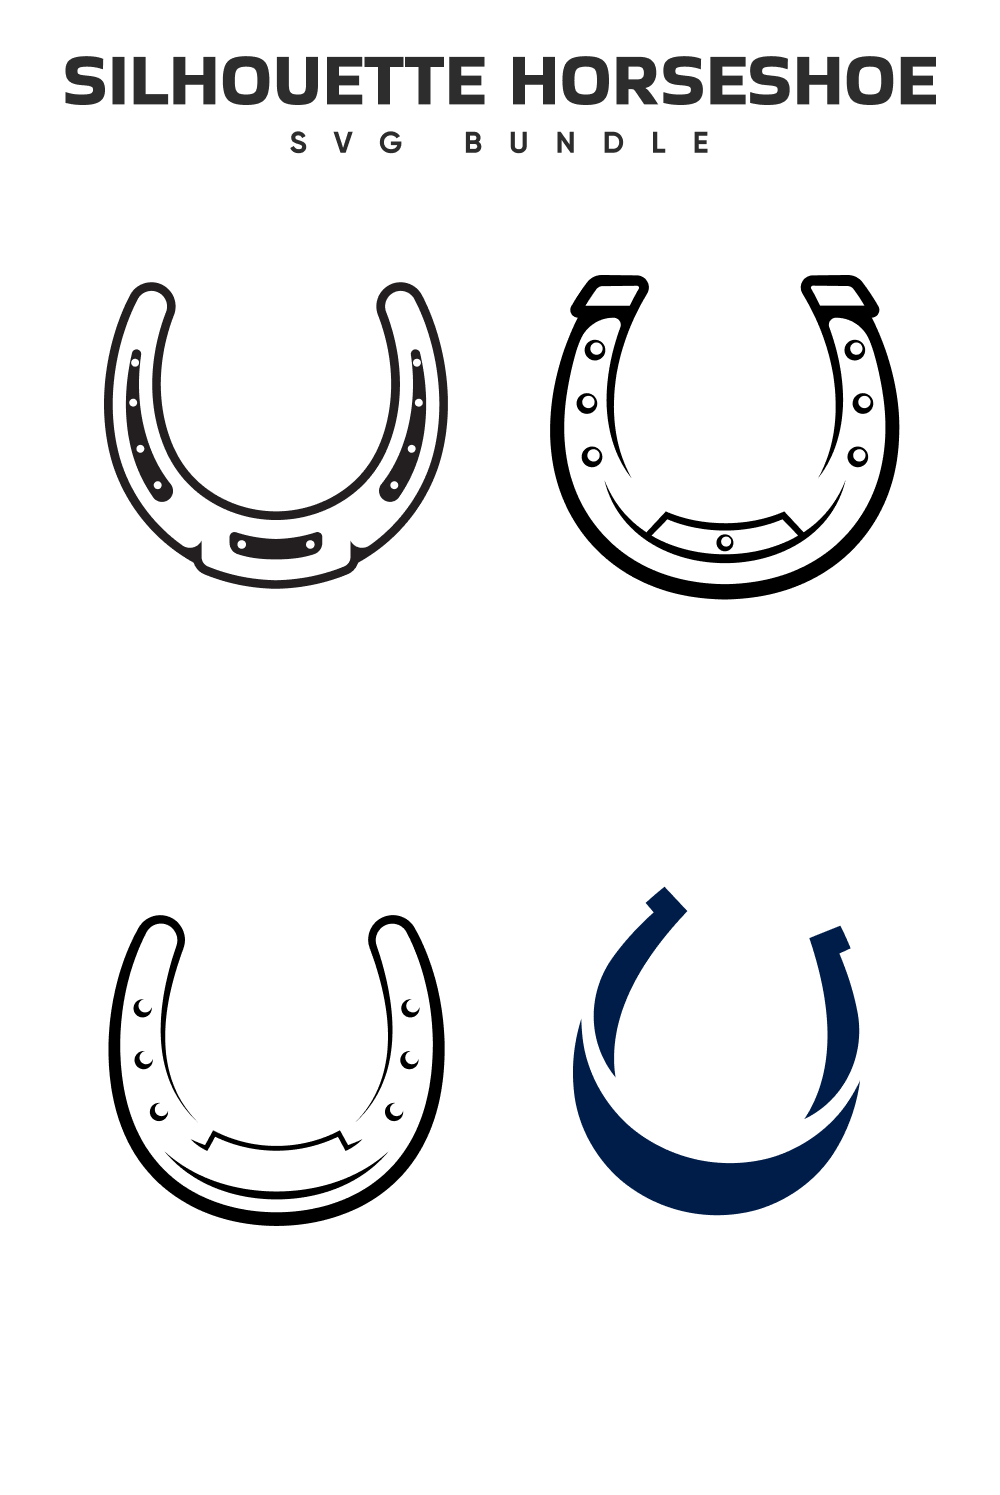 Set of three horseshoes with different designs.